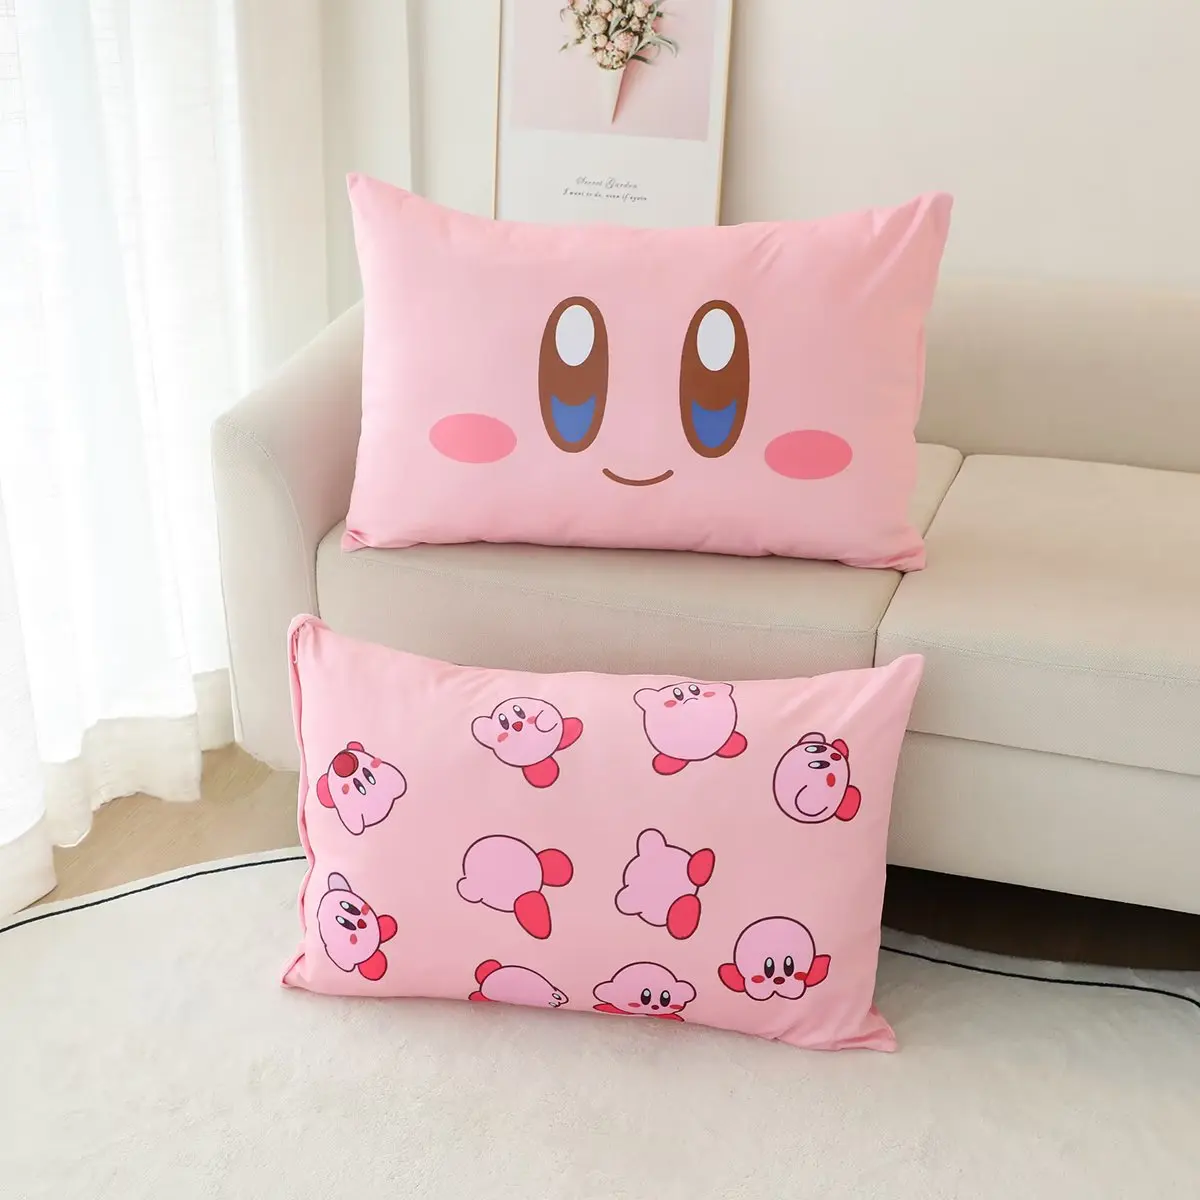 Cute Kirby Pillowcase Lovely Japanese Style Anime Double Sided Printing Pink Kirby Pillow Cover Home Decor - Kirby Plush